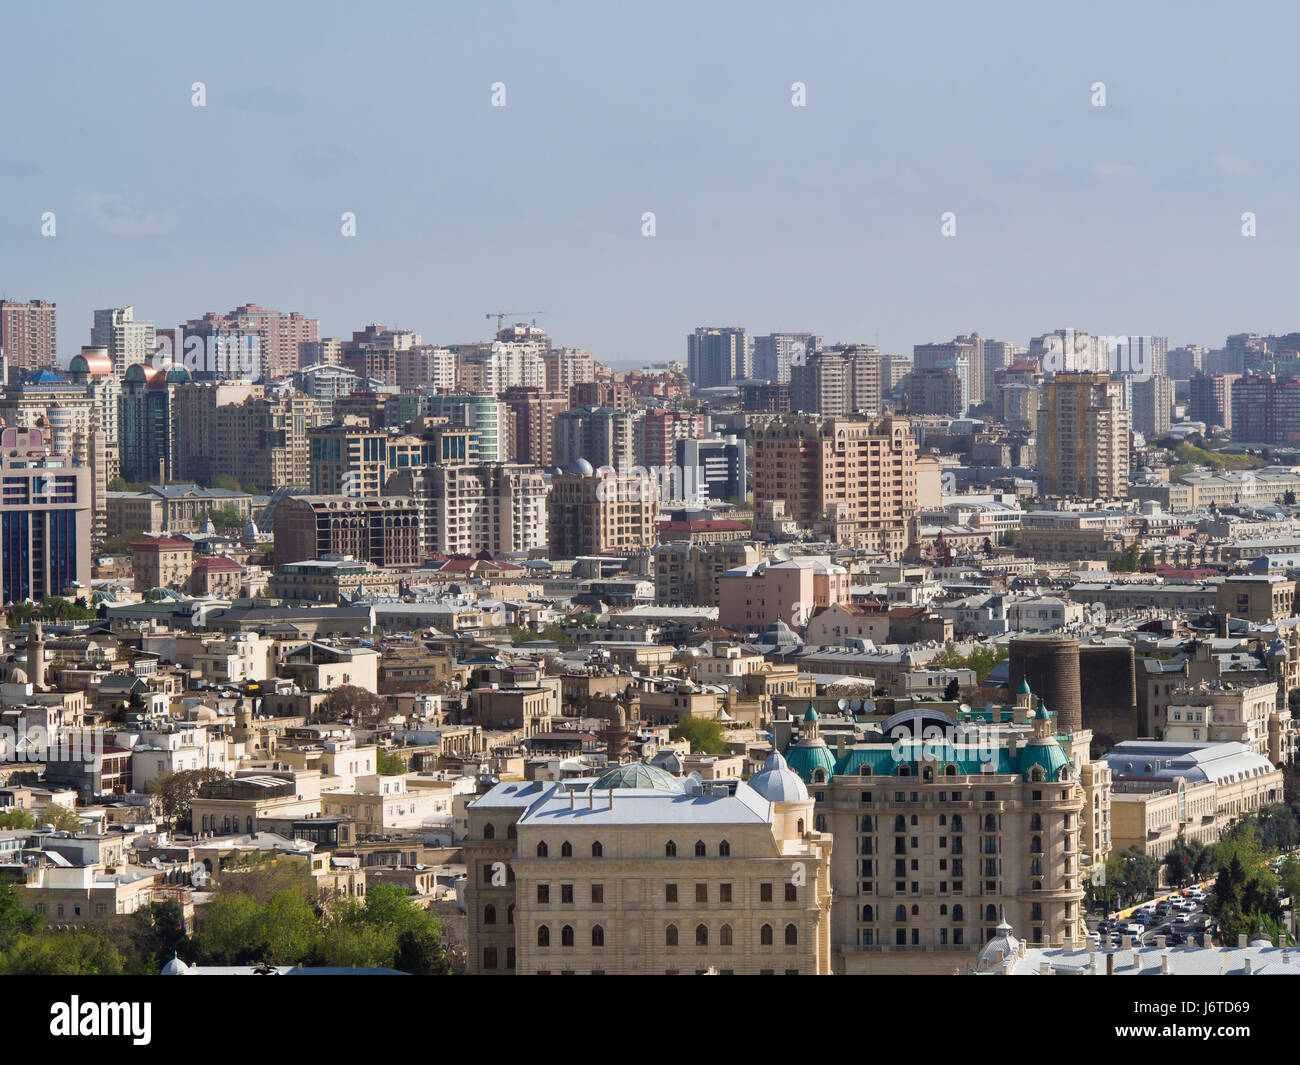 Baku, the capital city of Azerbaijan, on the shore of the Caspian sea, view of inner city highrises  and the old town, from the Dagustu park Stock Photo